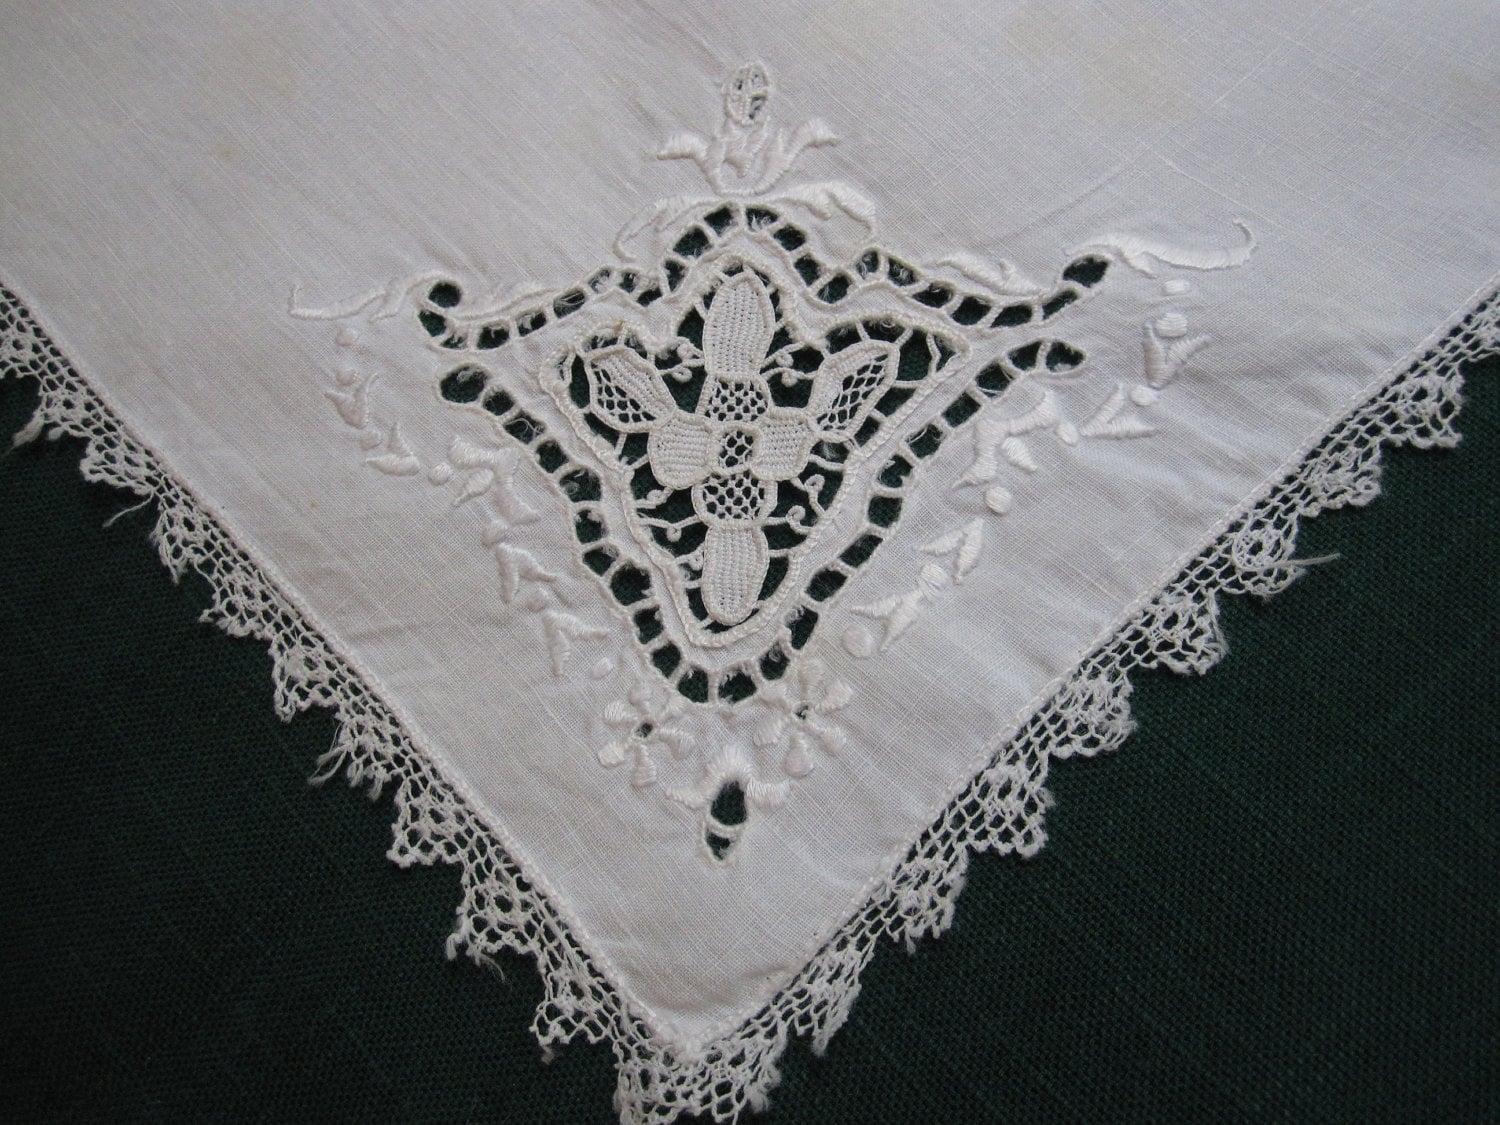 Antique Cutwork Embroidered Lace Trim Napkins